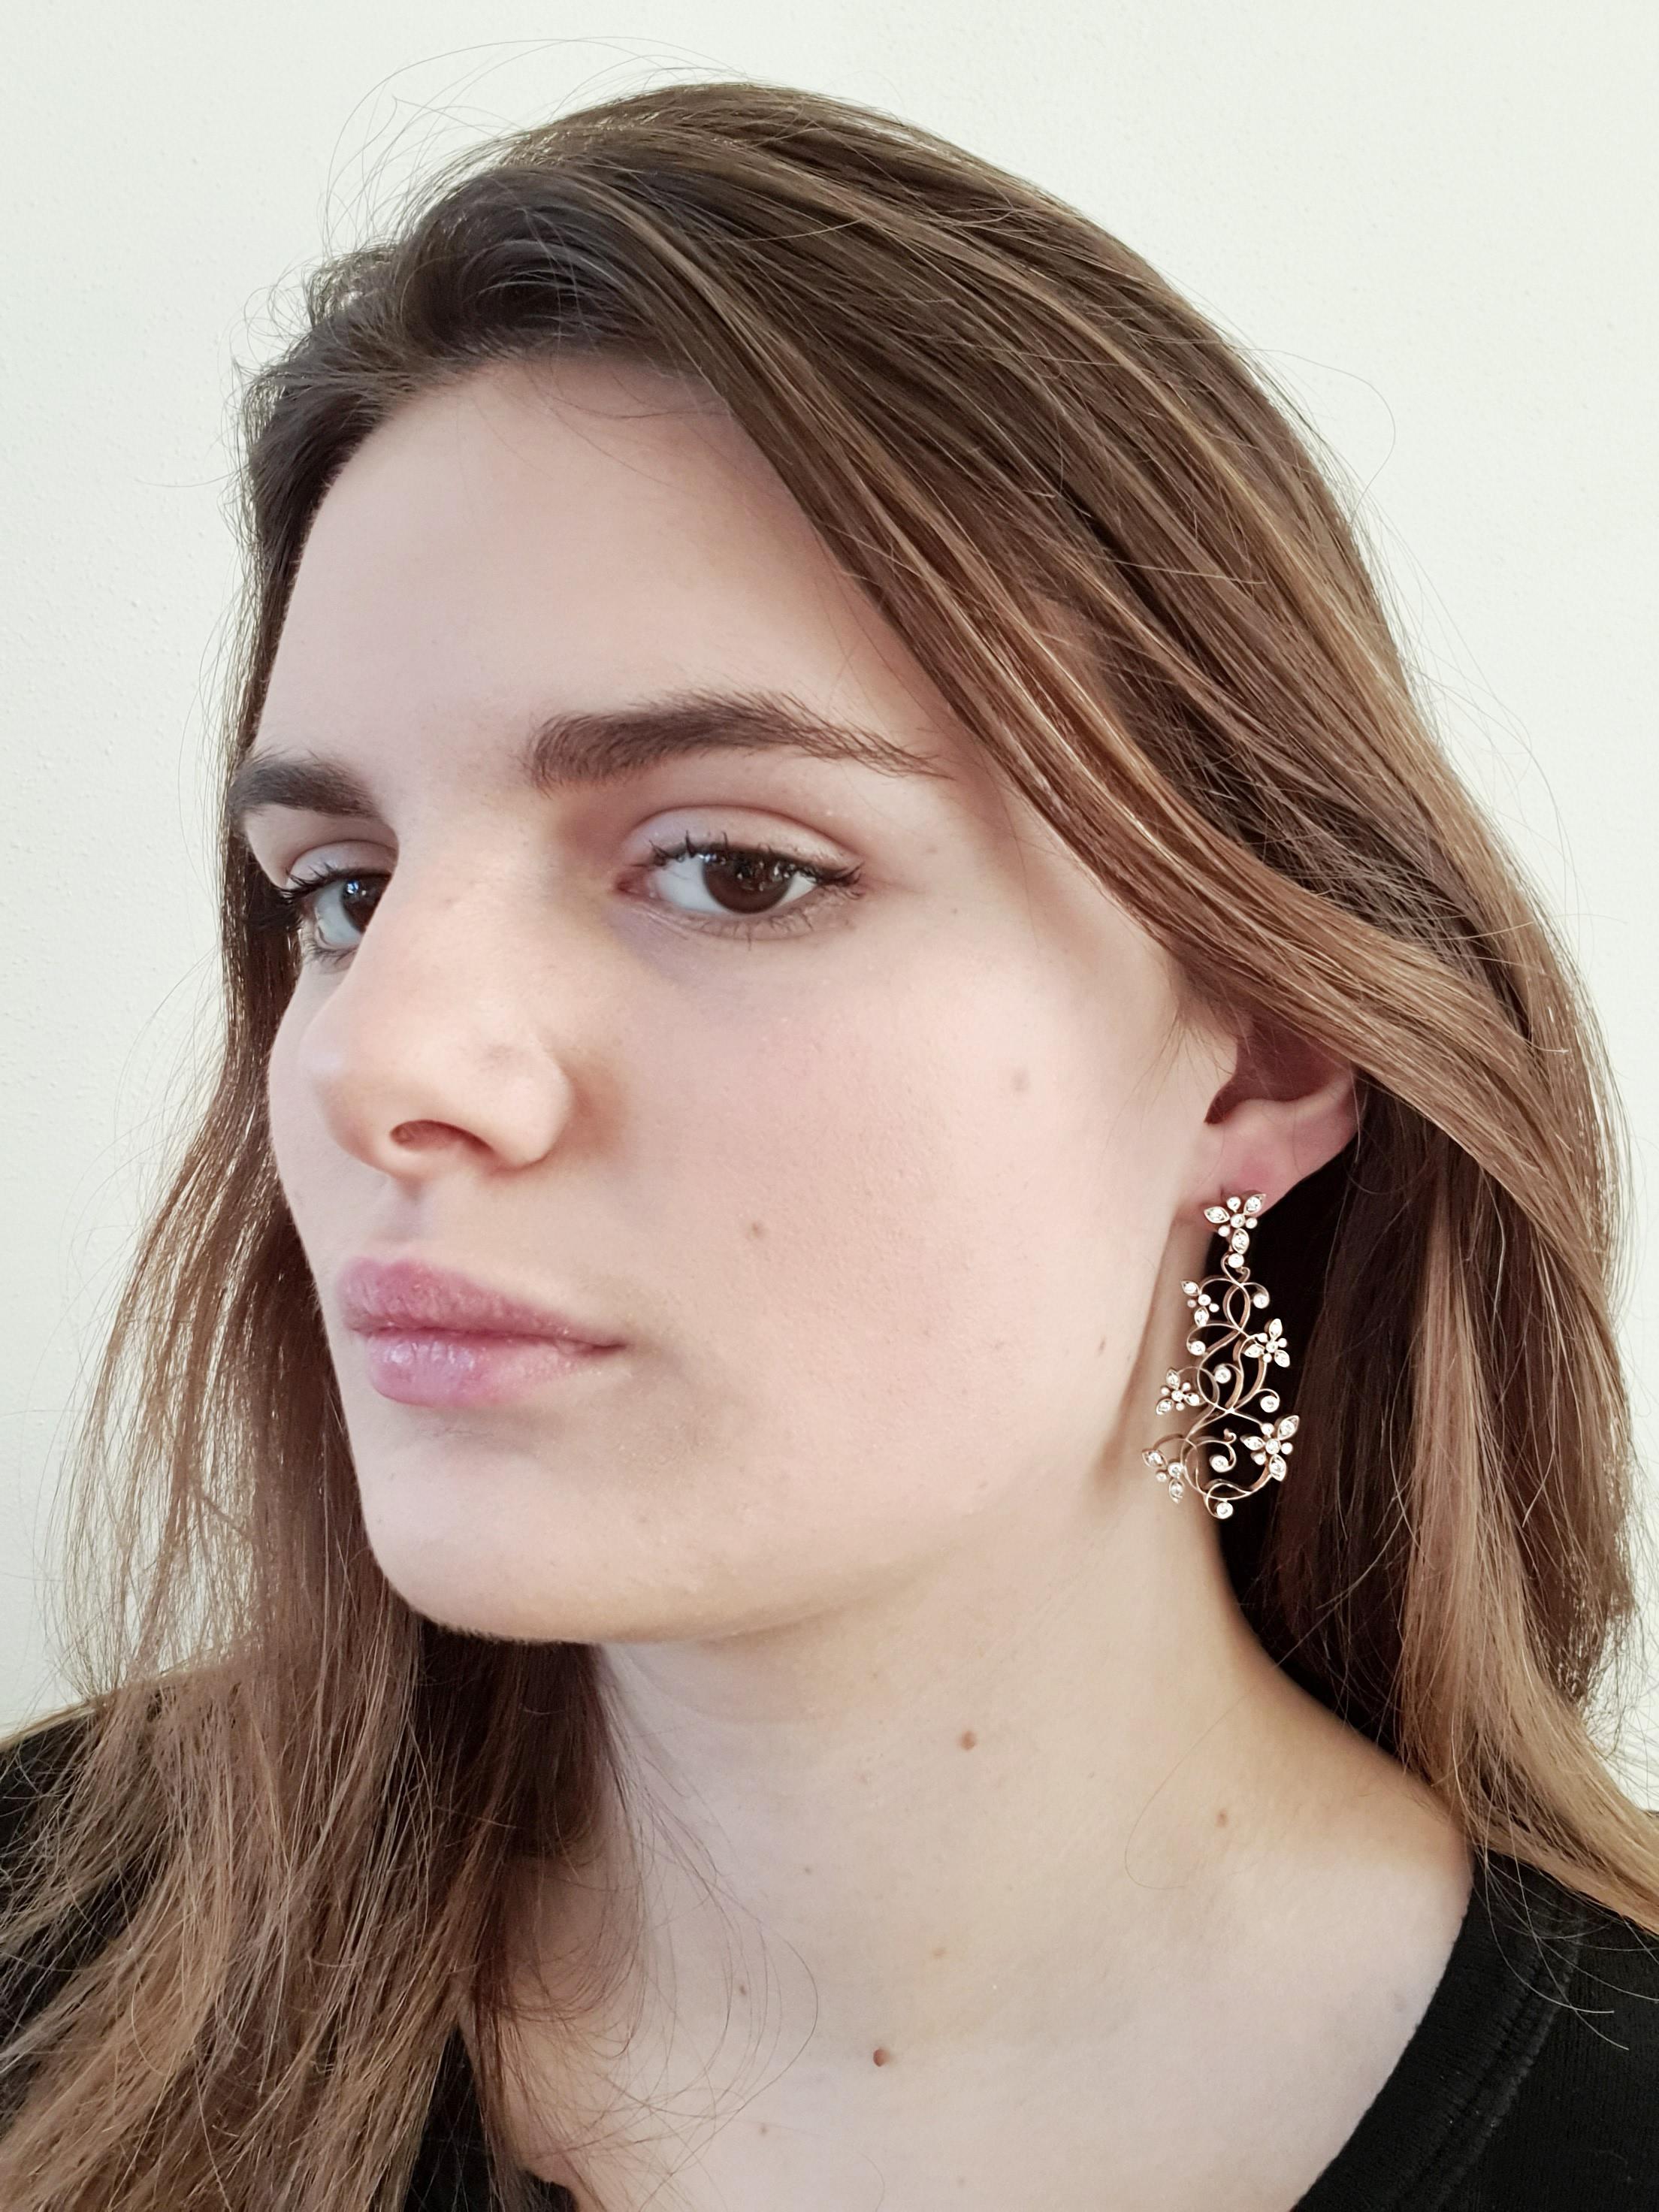 Dalben design Diamonds floral chandelier earrings mounted in 18 kt white gold with 88 white round brilliant cut diamonds total weight 1,50 carats .
Earring dimension: width 22 mm, height 46 mm.  
The earring have been designed and handcrafted in our